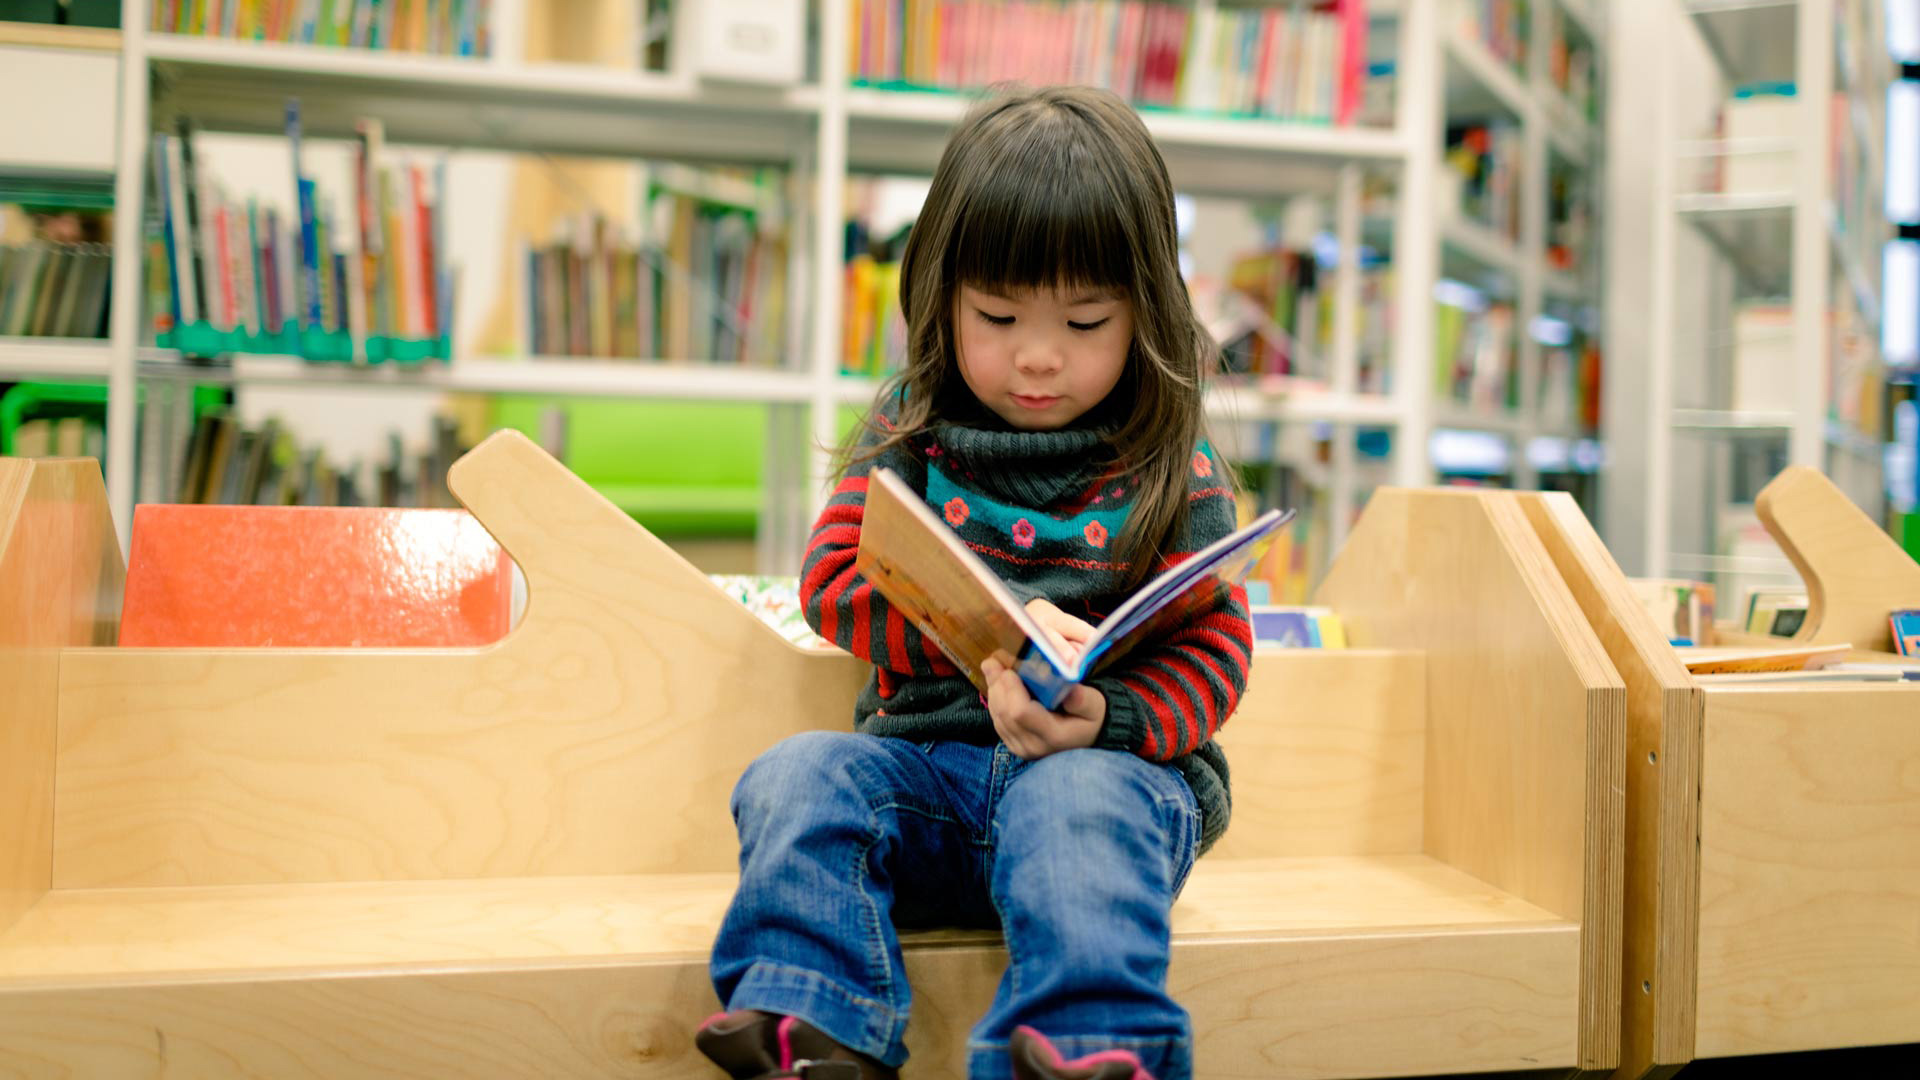 A young child looks through an open book in a library.